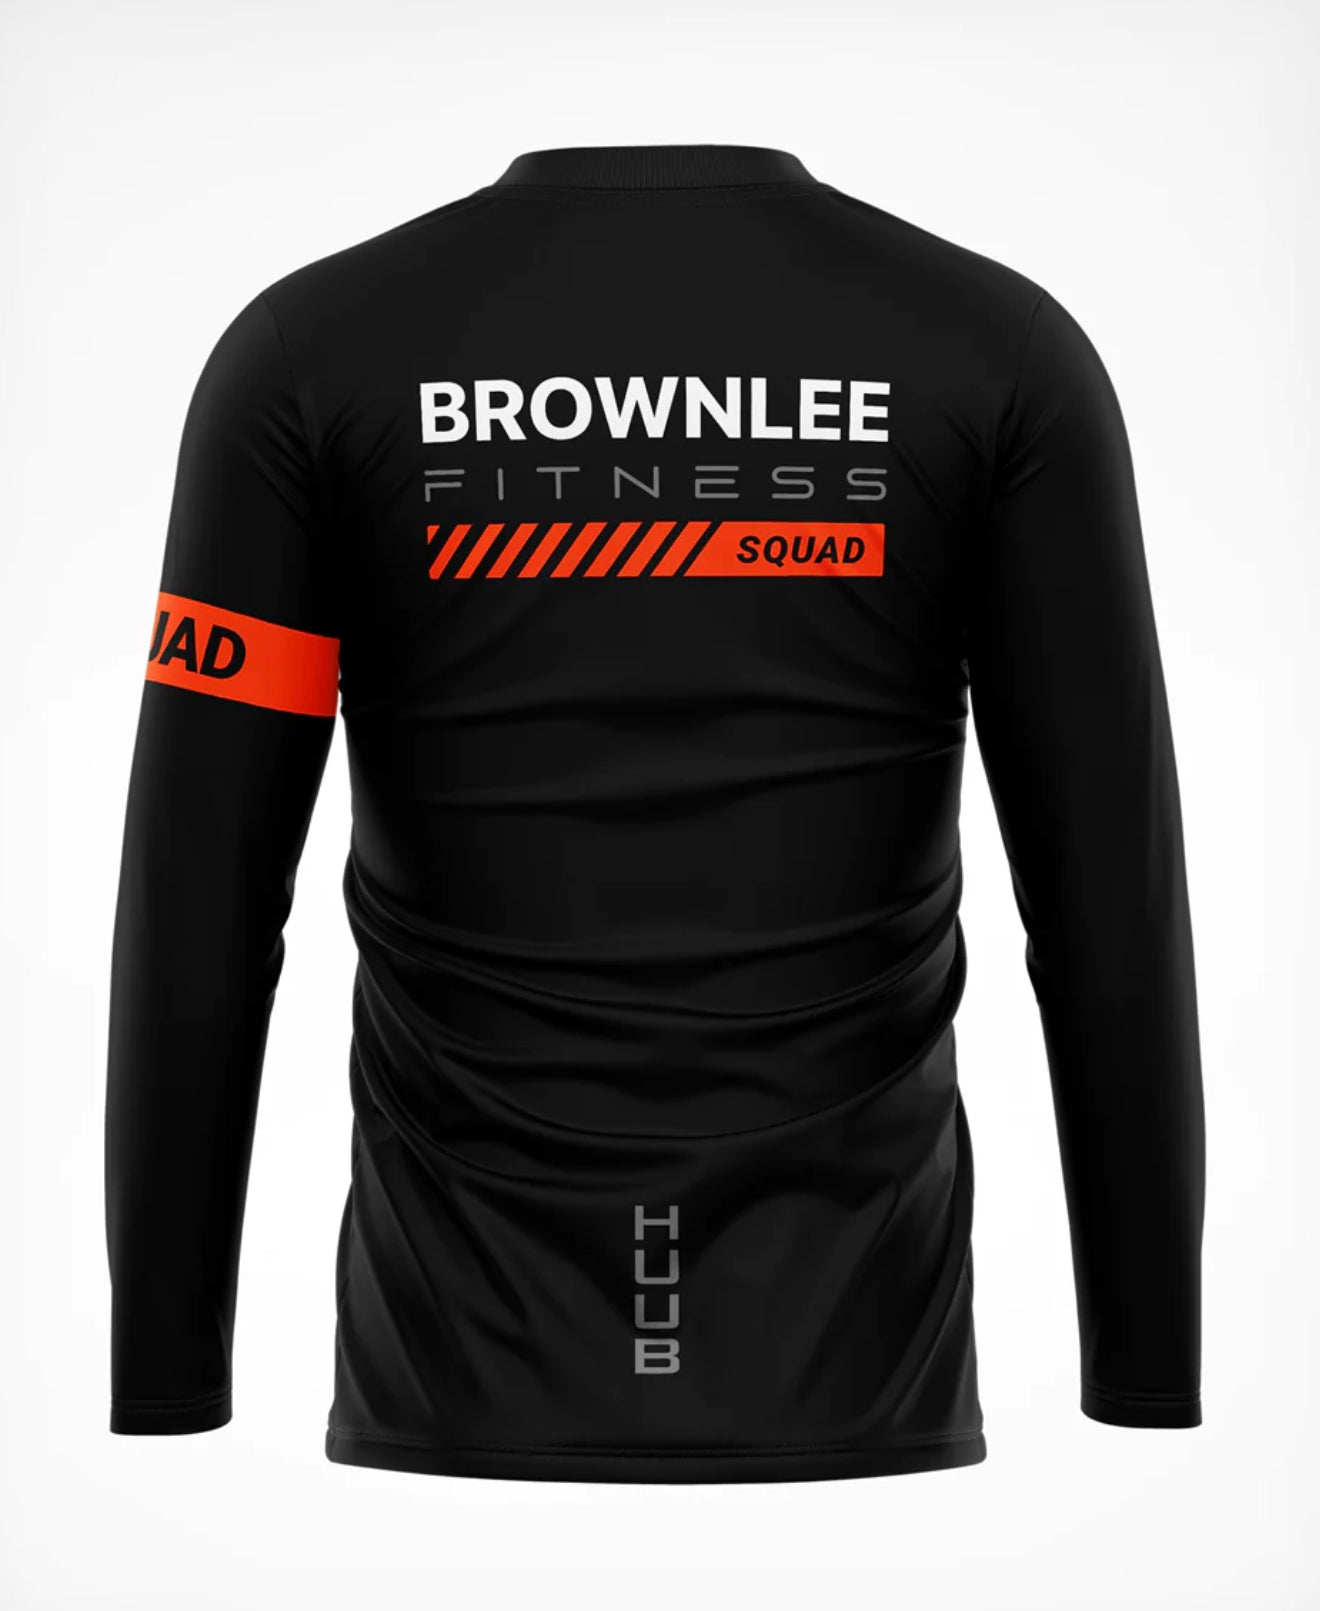 Brownlee Fitness Technical T-Shirt - Unisex